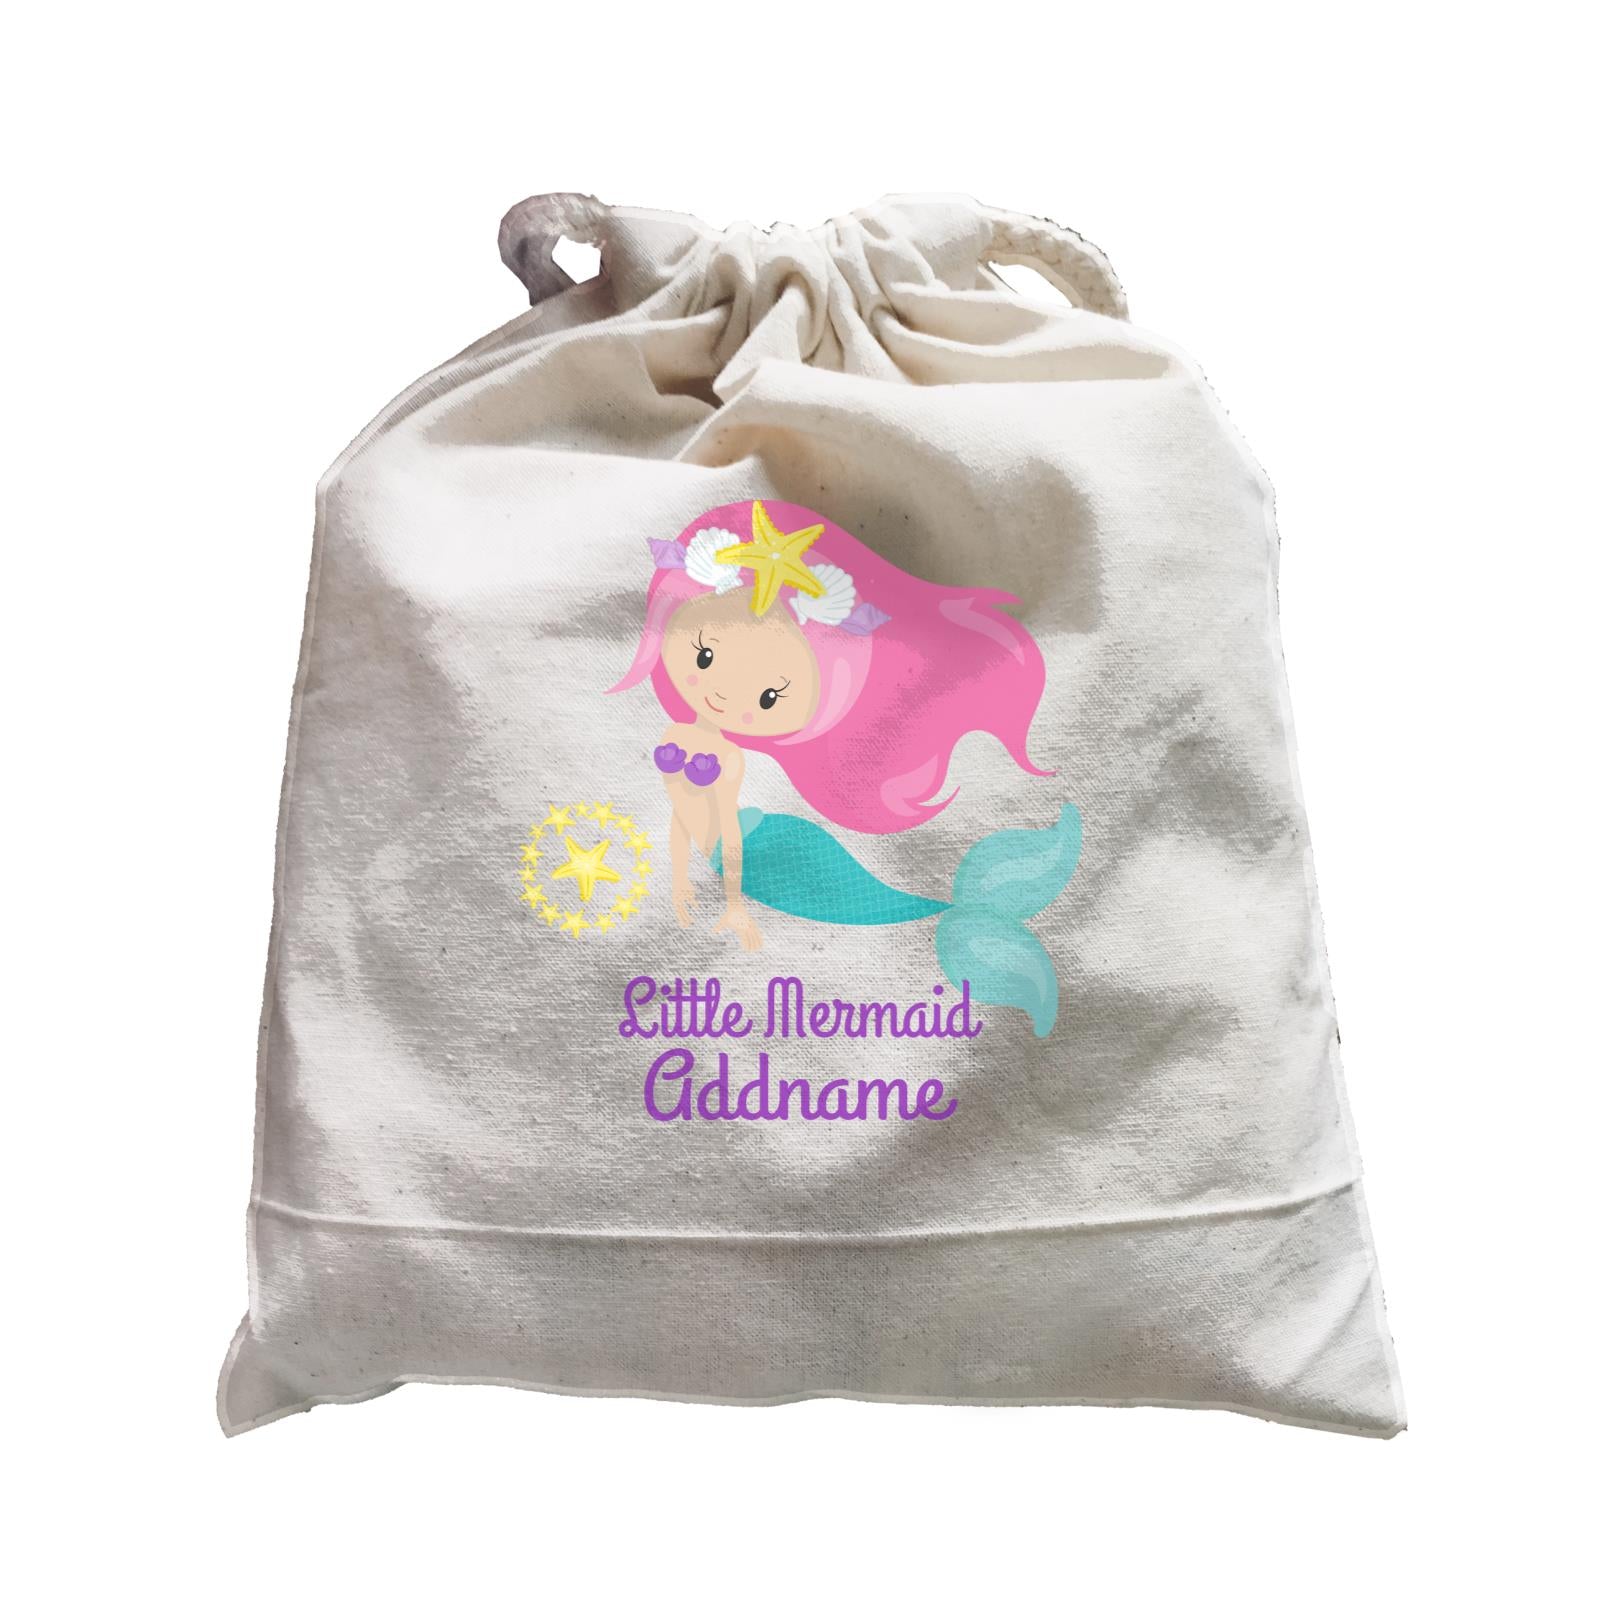 Little Mermaid Swimming with Starfish Emblem Addname Satchel